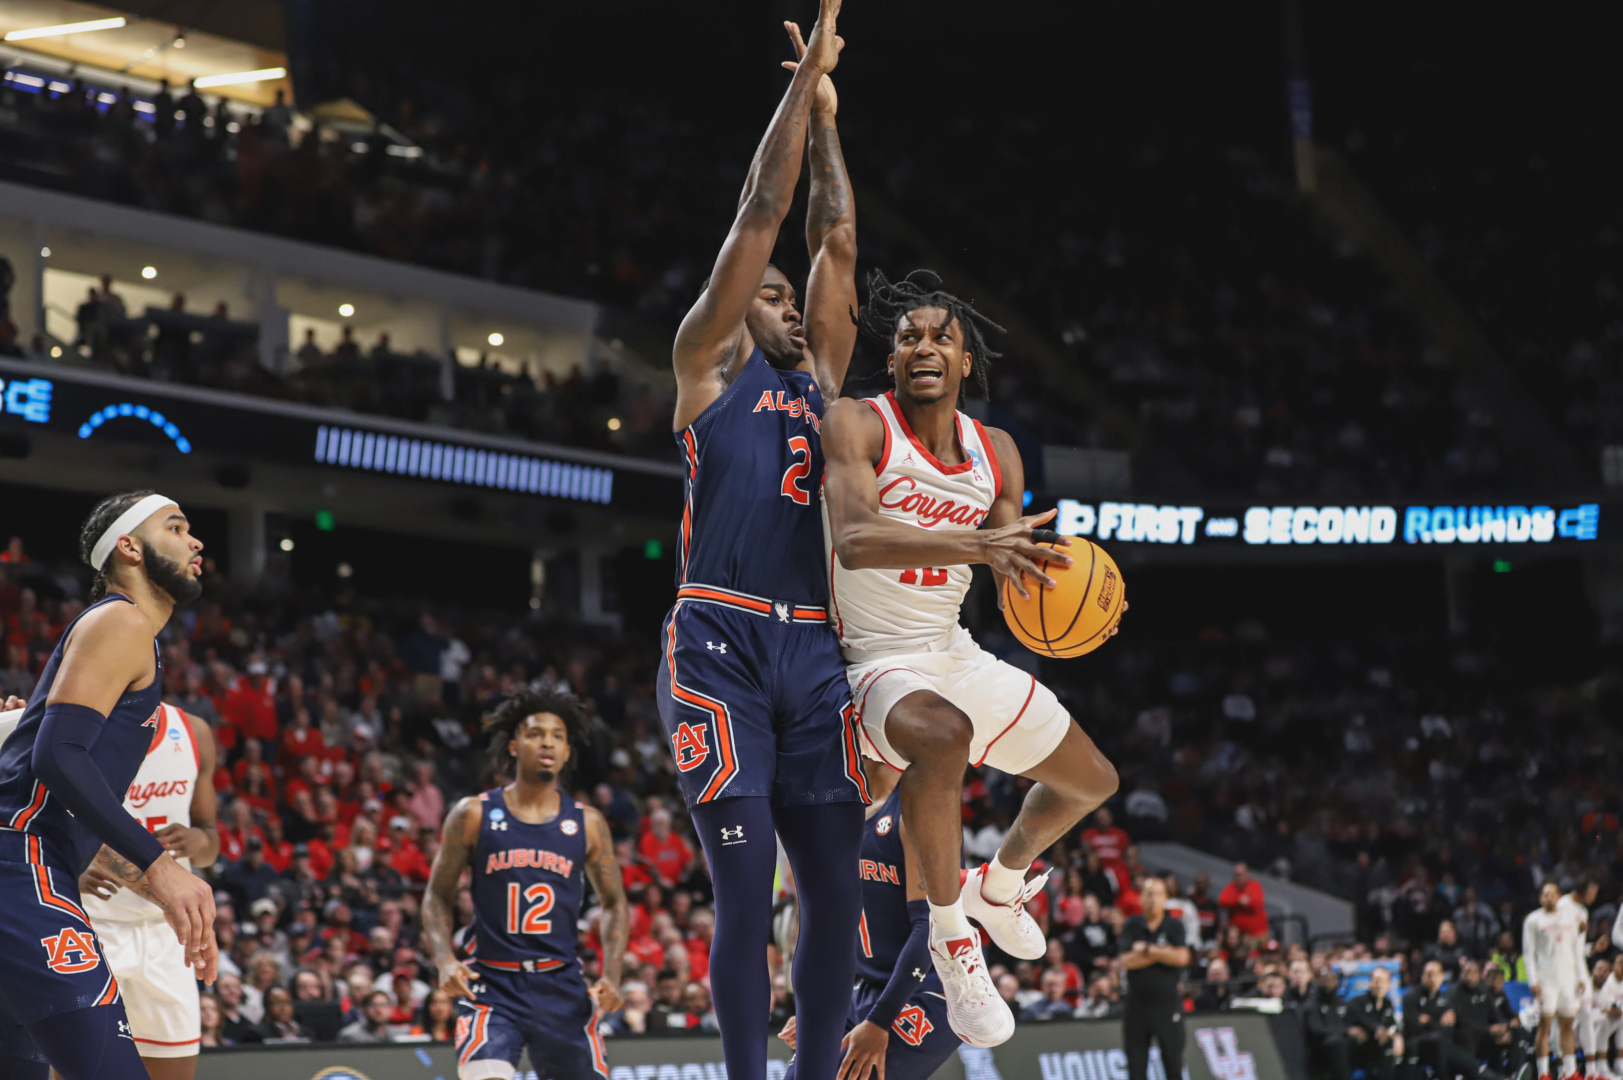 Tramon Mark's career-high 26 points helped UH erase a 10-point halftime deficit and defeat Auburn to advance to its fourth straight Sweet 16. | Anh Le/The Cougar